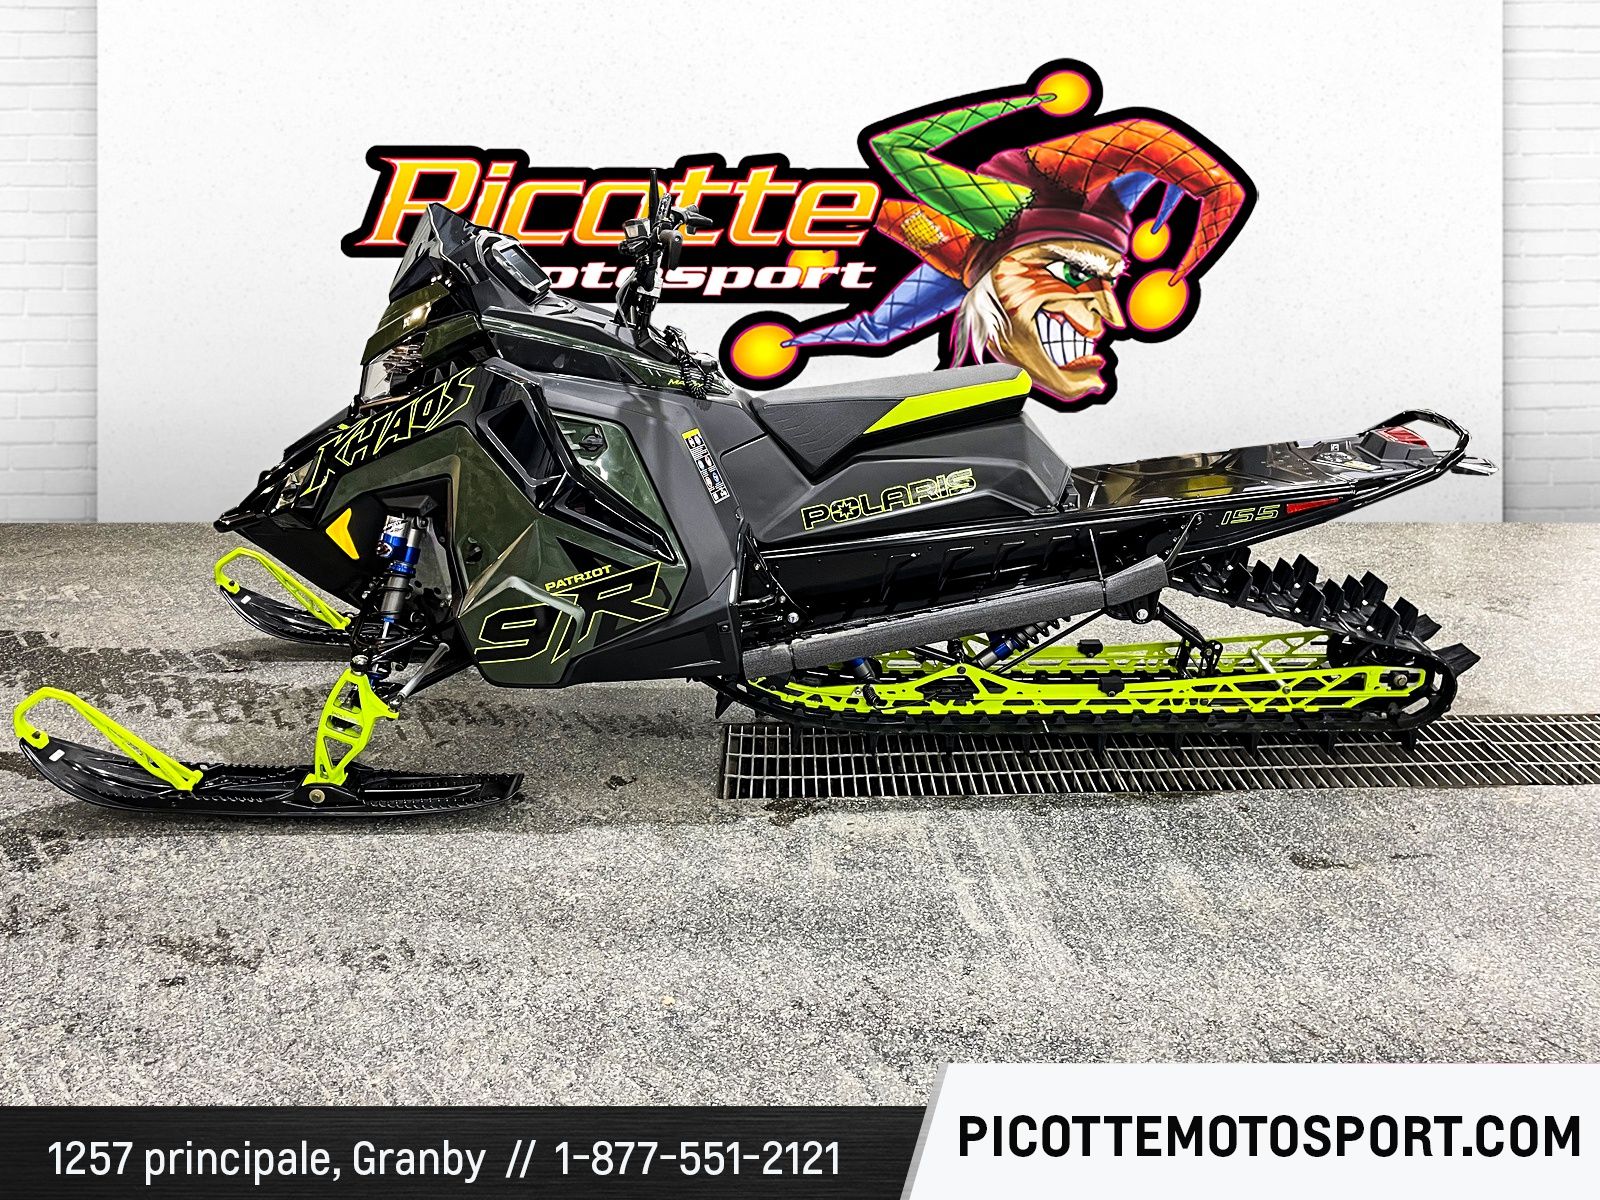 Our Snowmobile in New inventory in Granby - Picotte Motosport